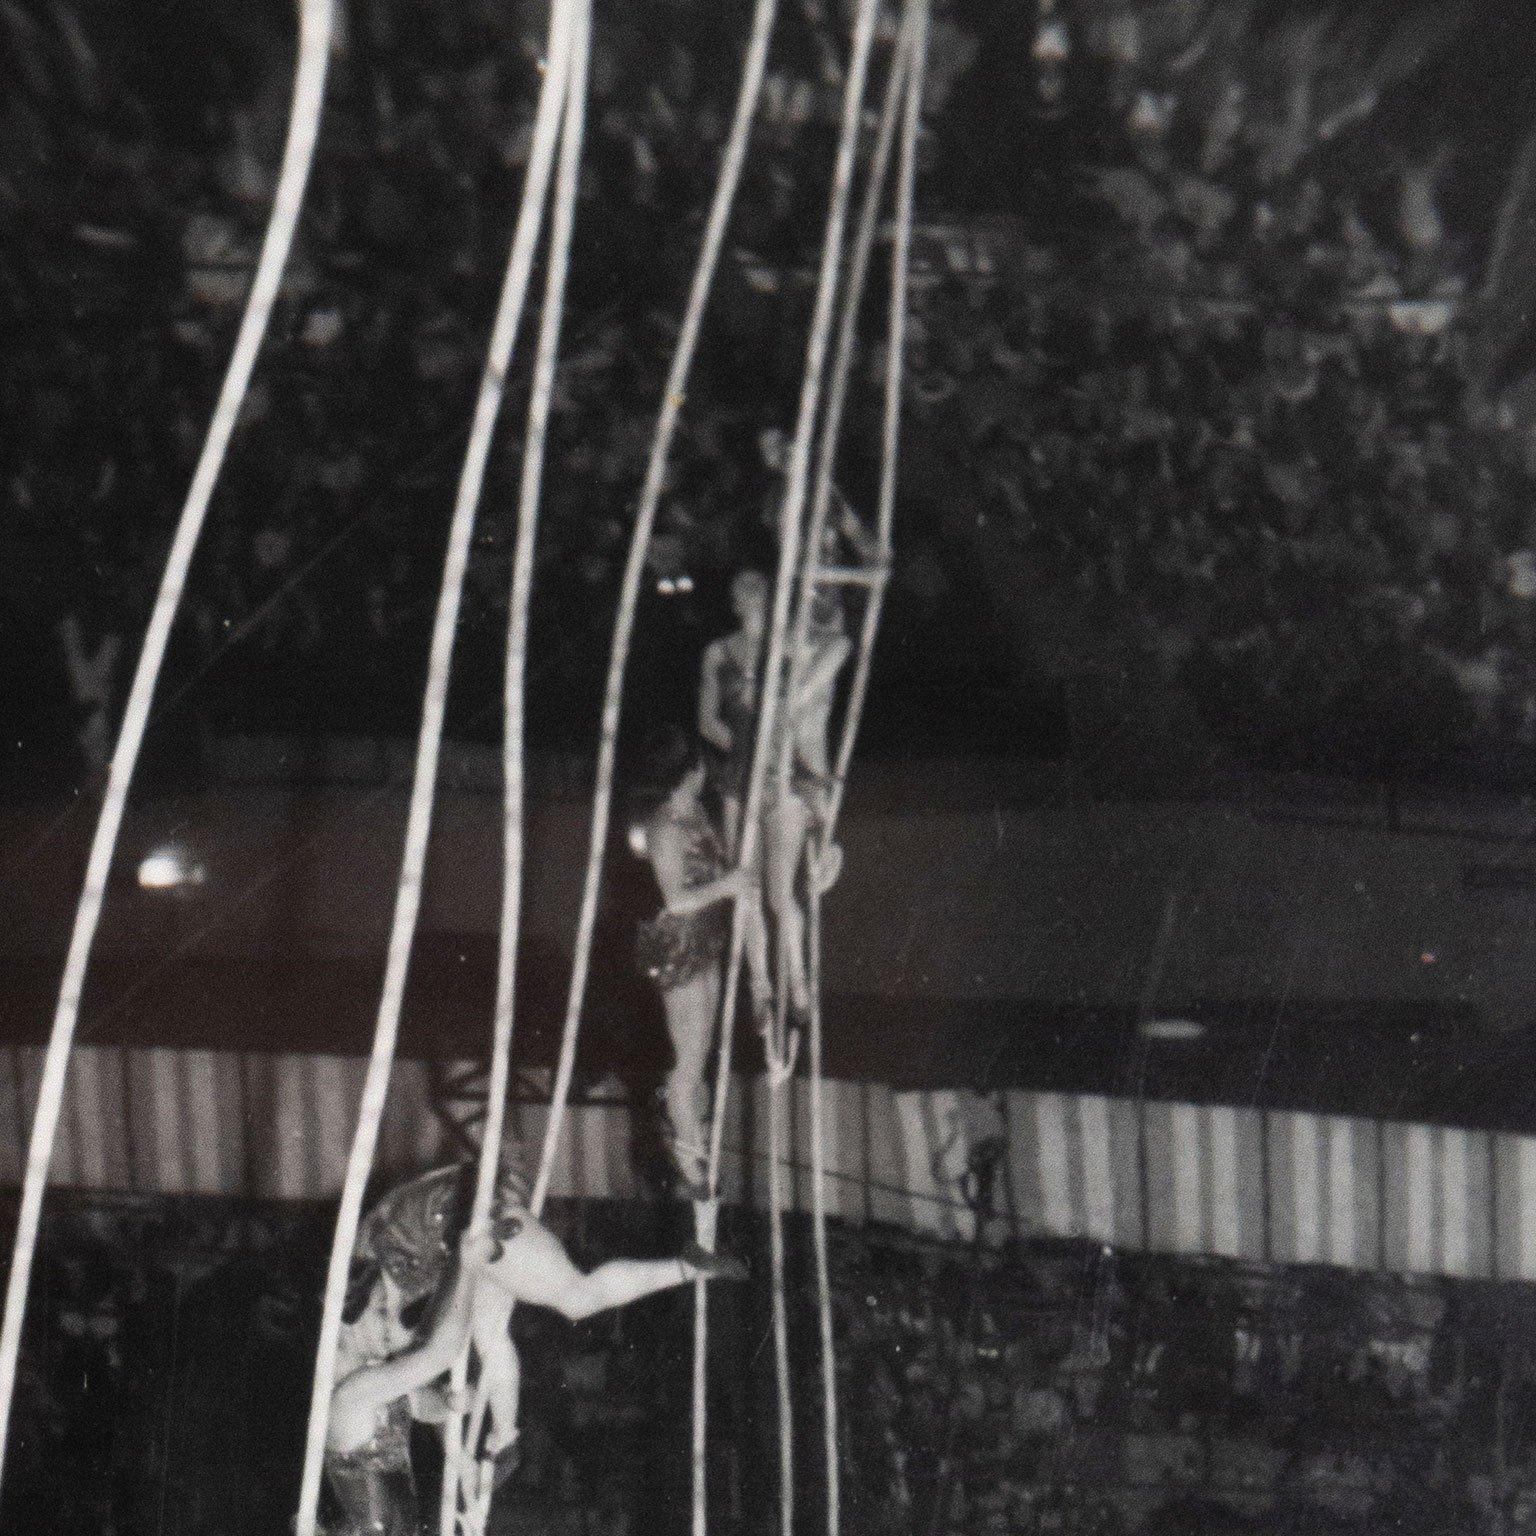 Tightrope Ladies - American Modern Photograph by Weegee